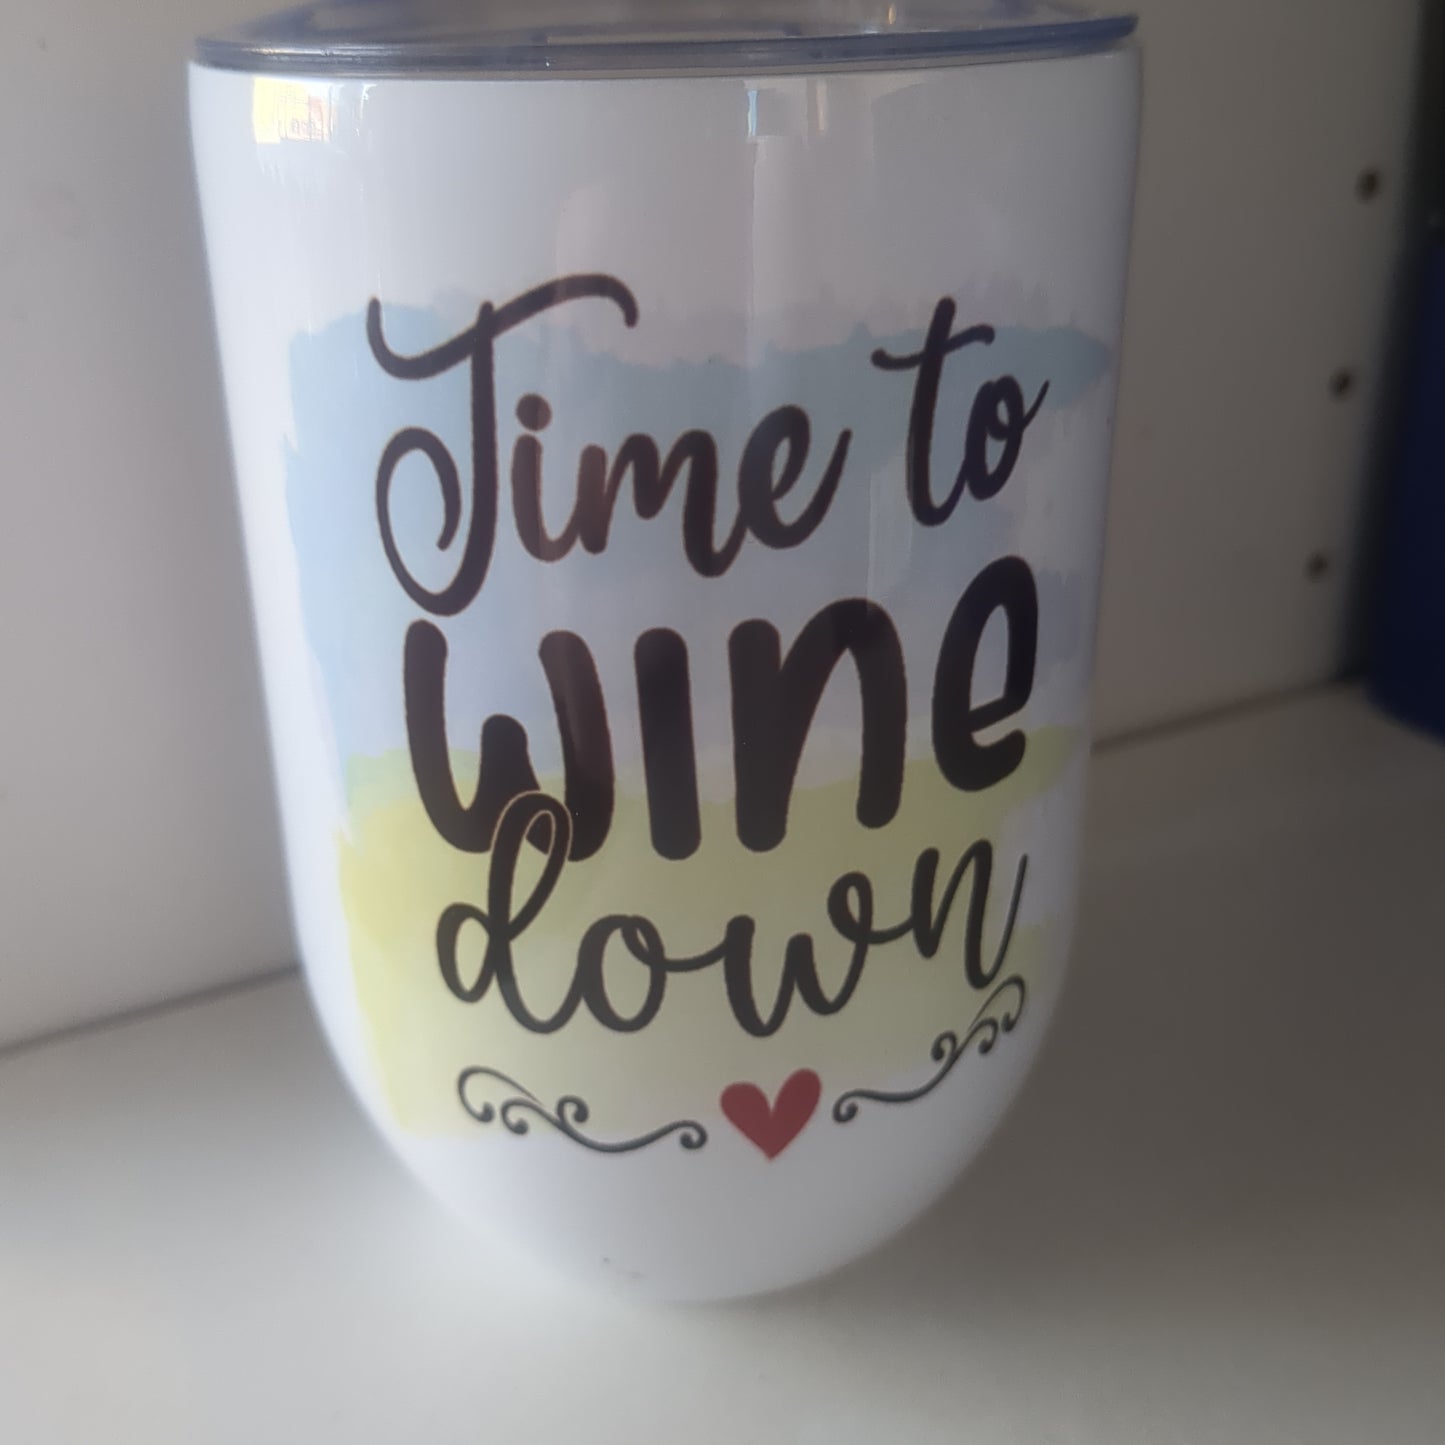 12 oz stainless steel, insulated wine tumbler Time To Wine Down